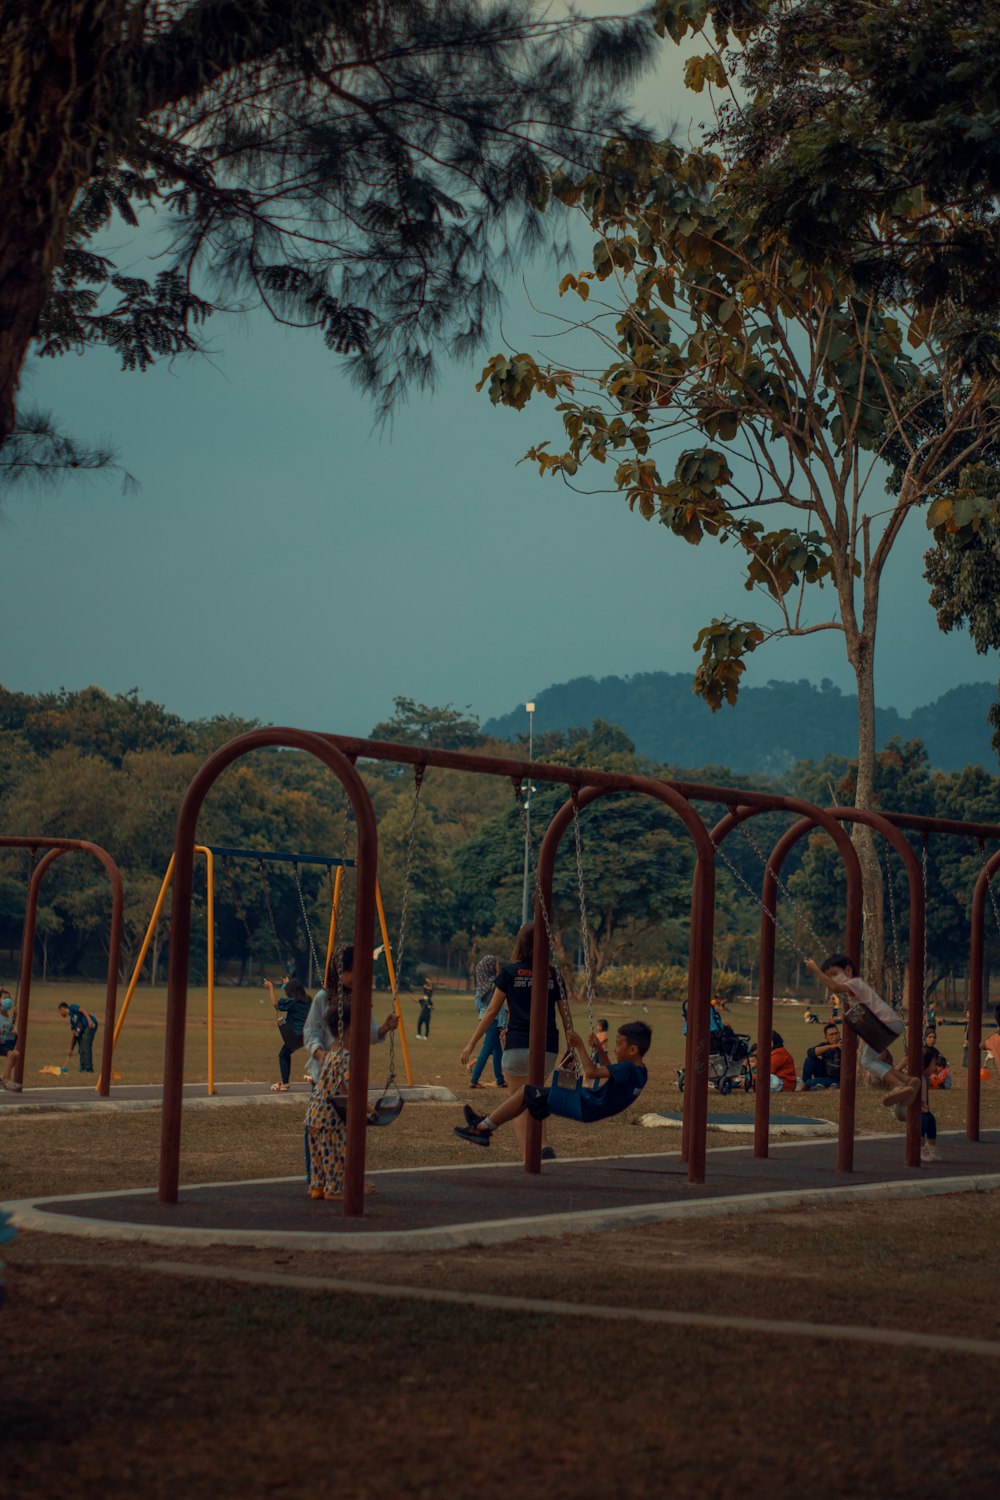 a group of people playing on a playground